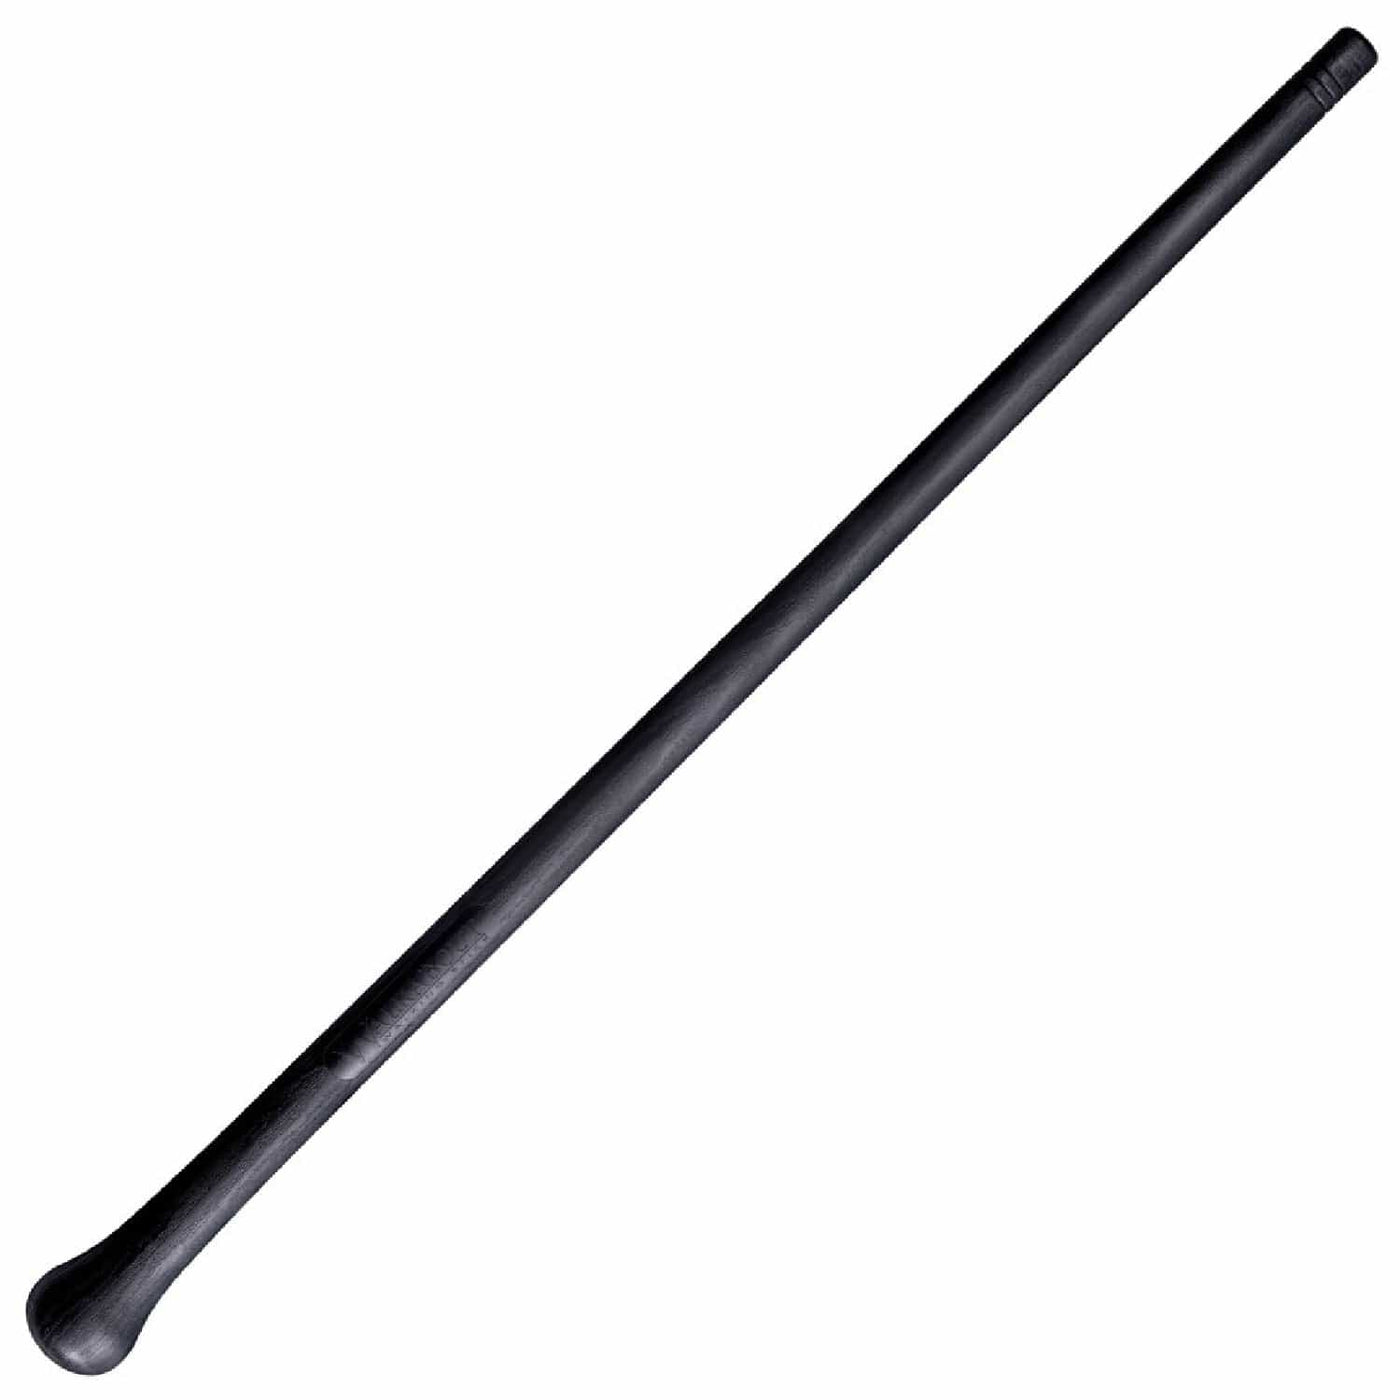 Cold Steel Cold Steel Walkabout Stick 38.50 in Overall Length Camping And Outdoor